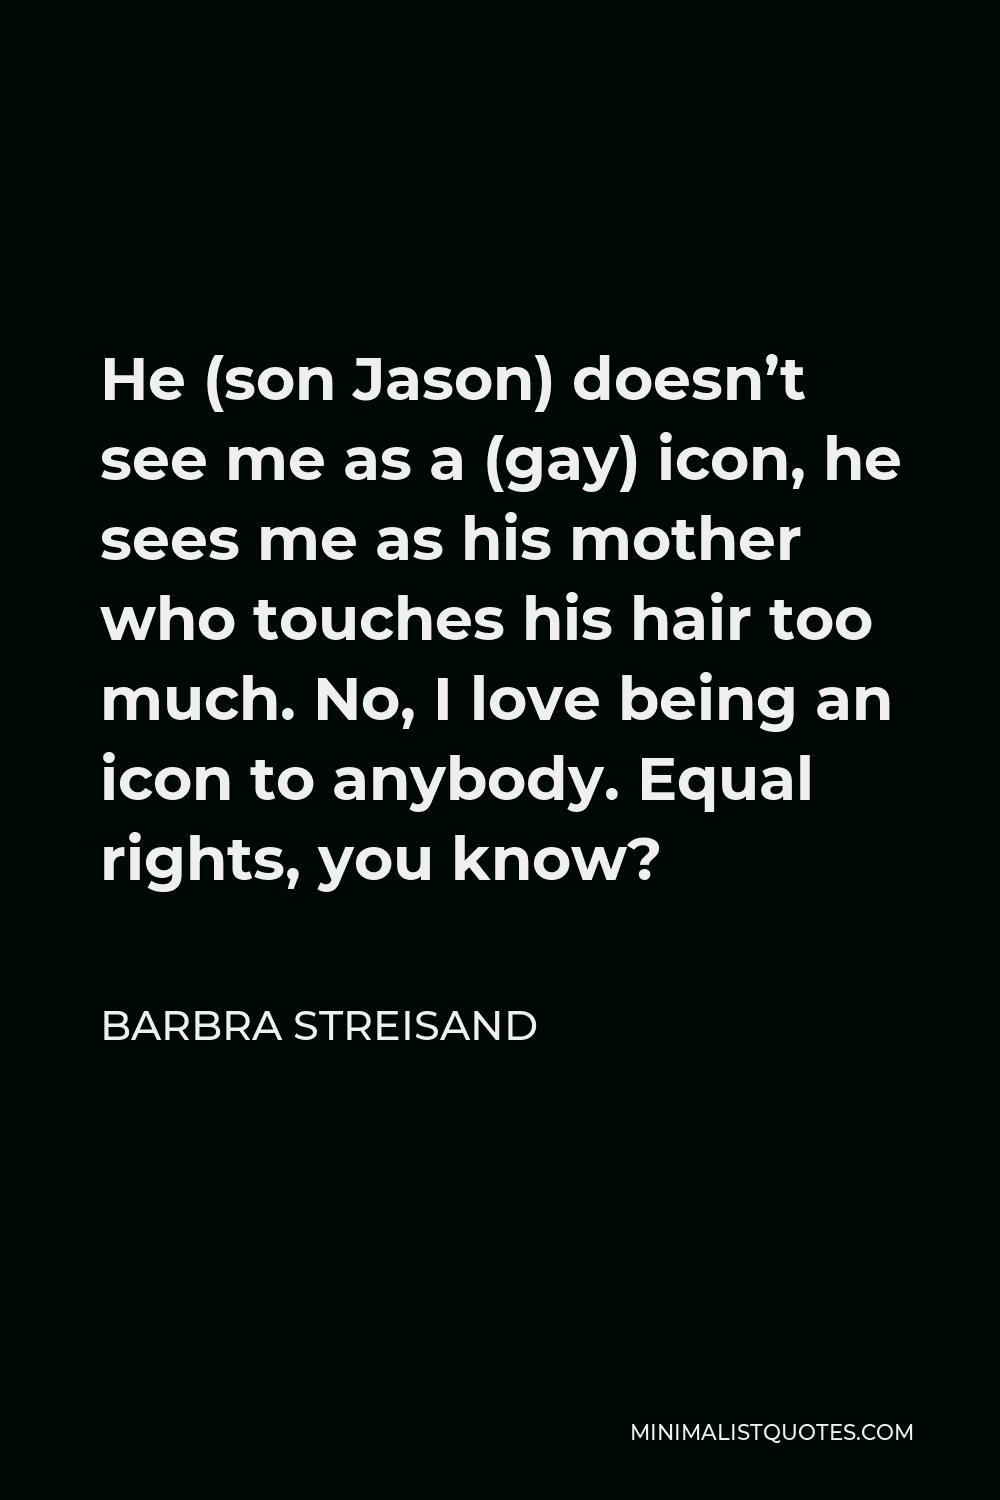 Barbra Streisand Quote - He (son Jason) doesn’t see me as a (gay) icon, he sees me as his mother who touches his hair too much. No, I love being an icon to anybody. Equal rights, you know?